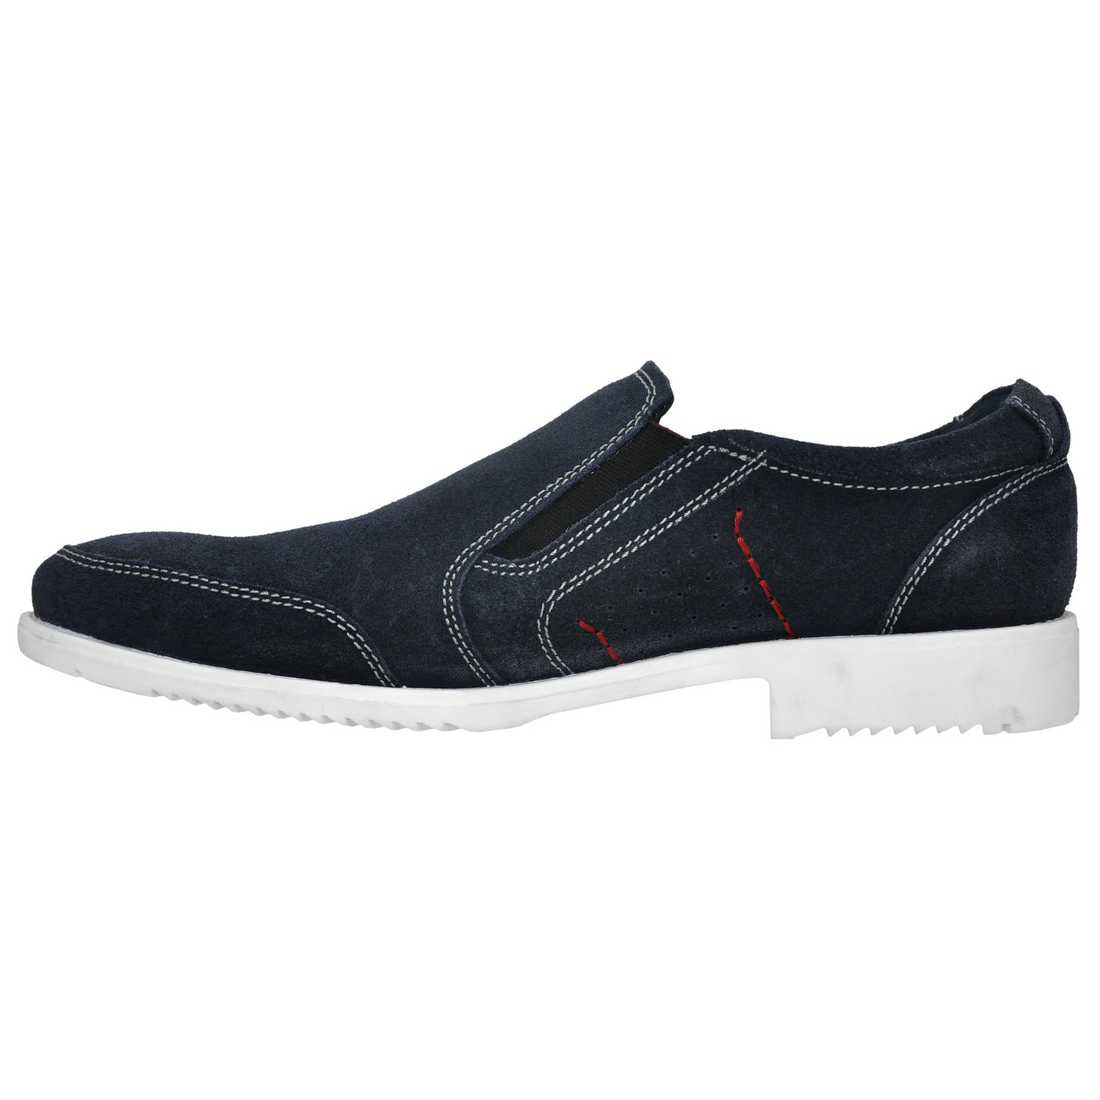 OHM New York Vamp Stitched Leather Slip-on Shoes Blue